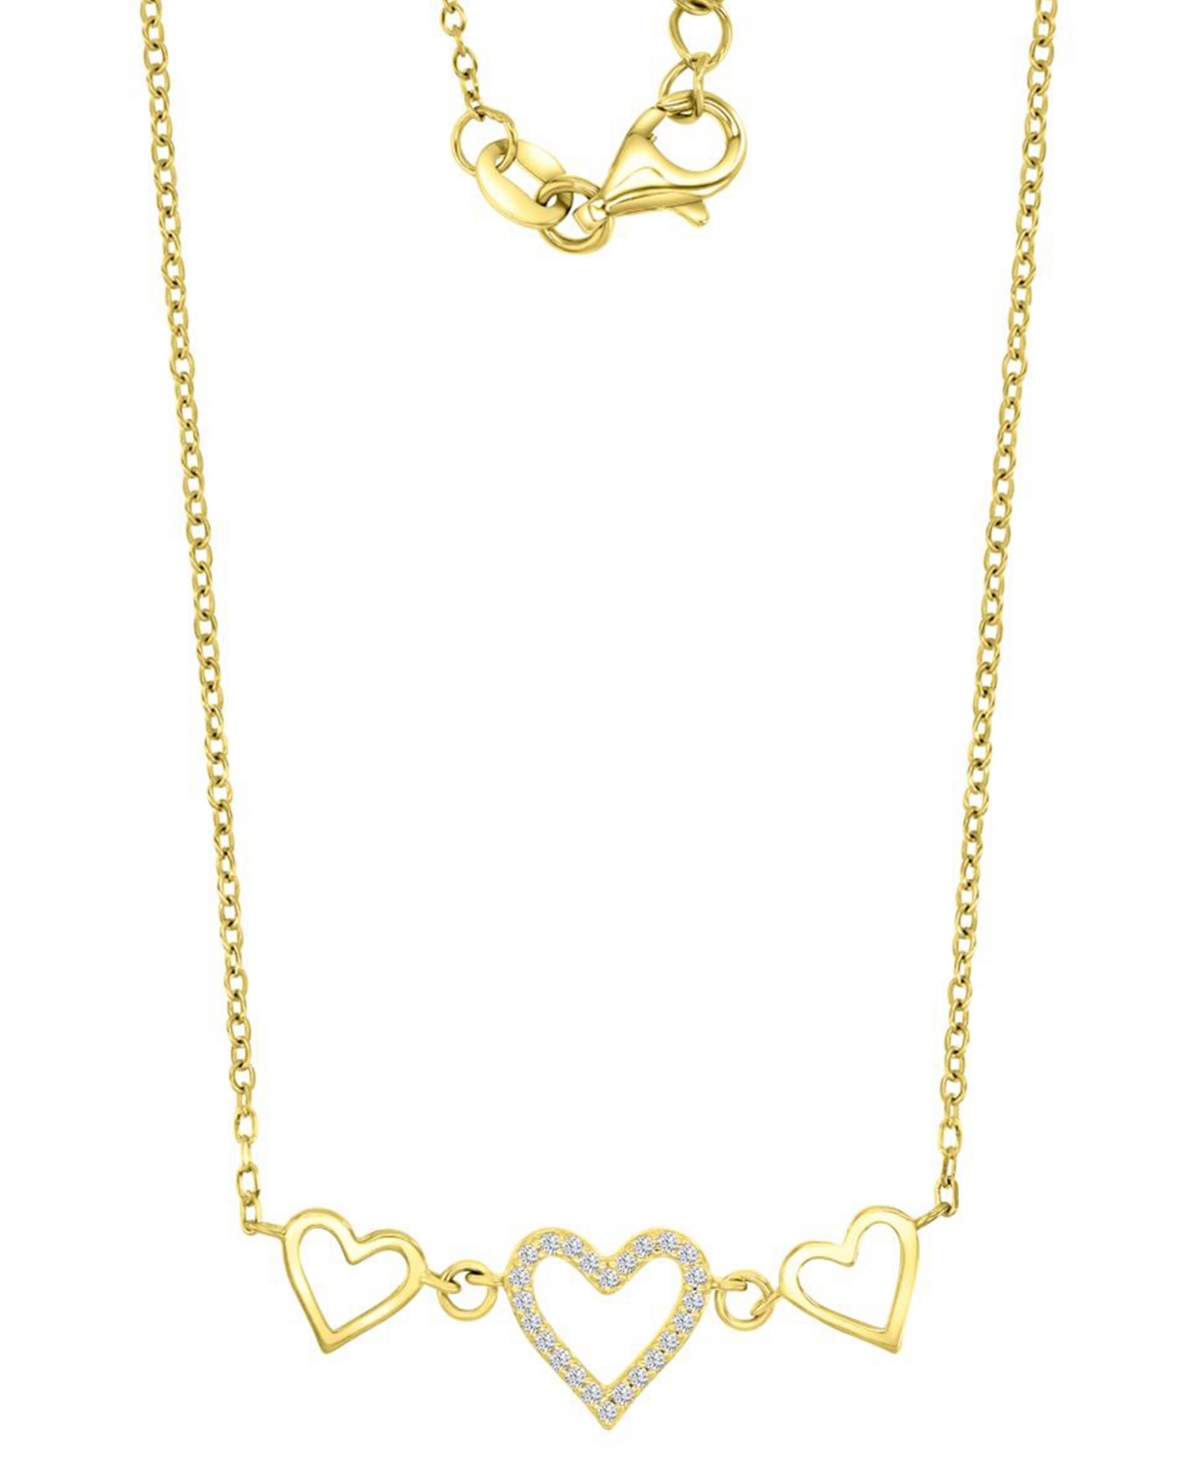 Cubic Zirconia Triple Heart Pendant Necklace in 14k Gold-Plated Sterling Silver, 13" + 2" extender - Gold